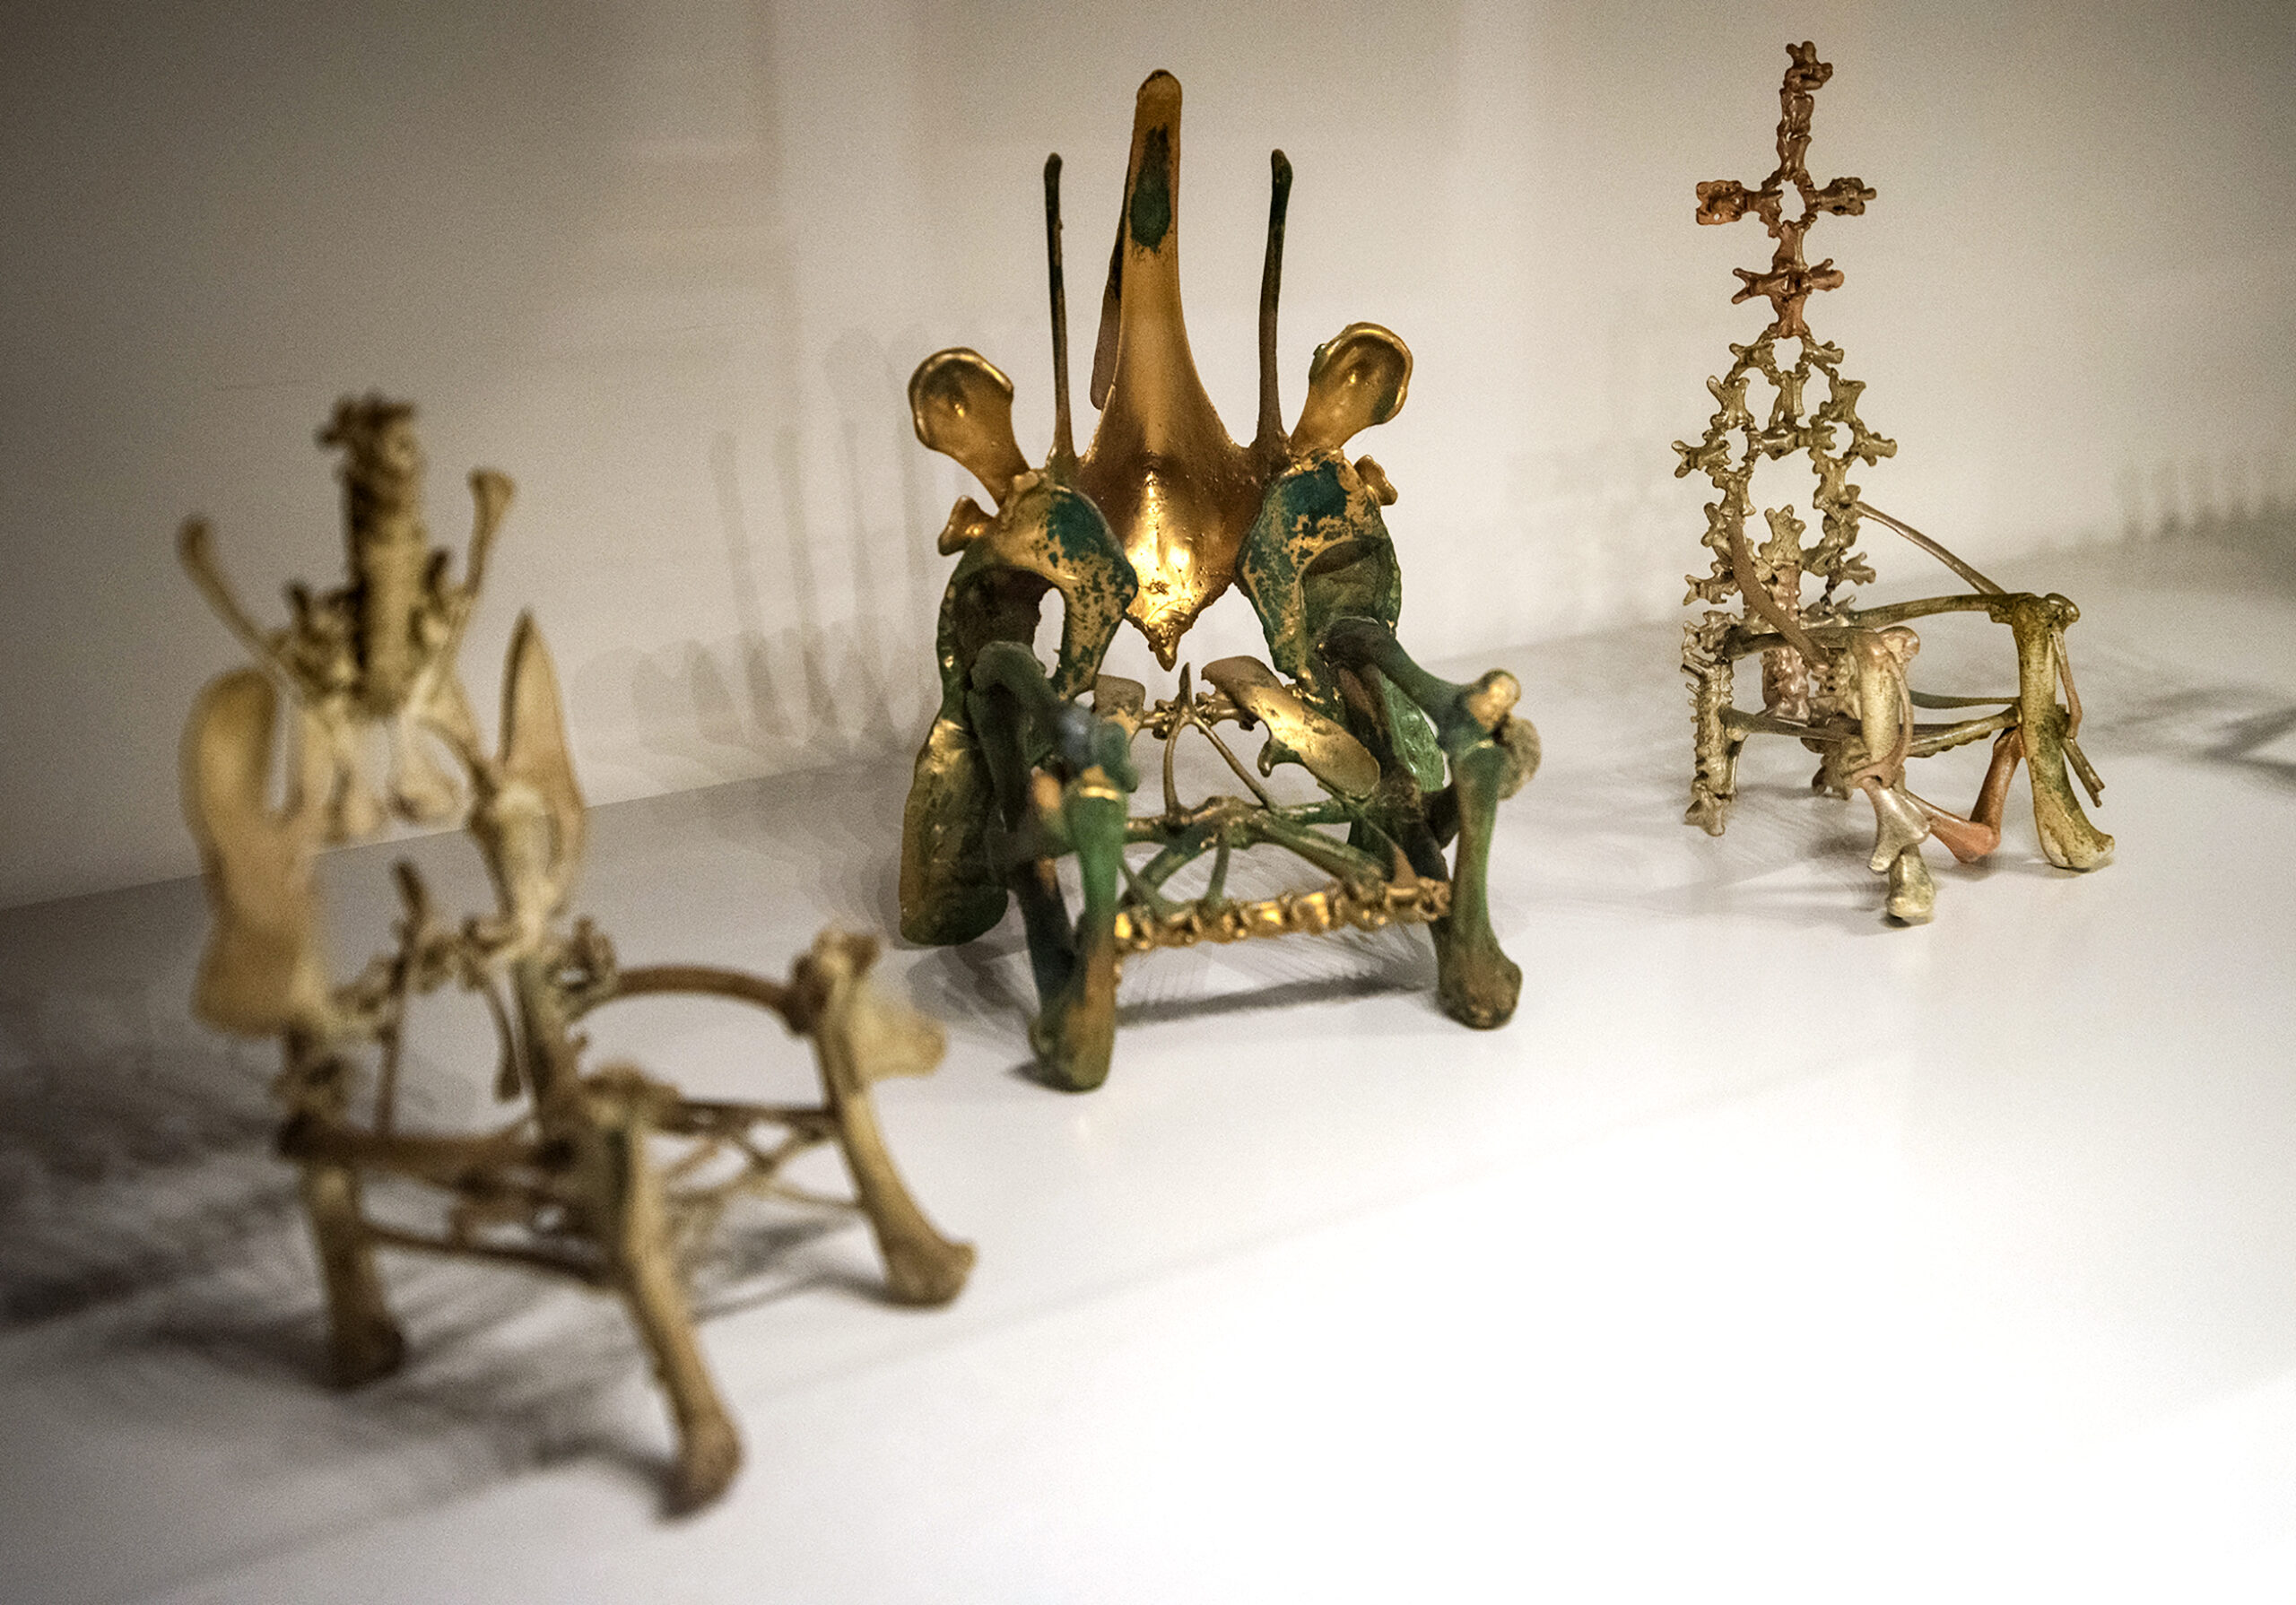 Green and gold painted miniature thrones made of poultry bones.